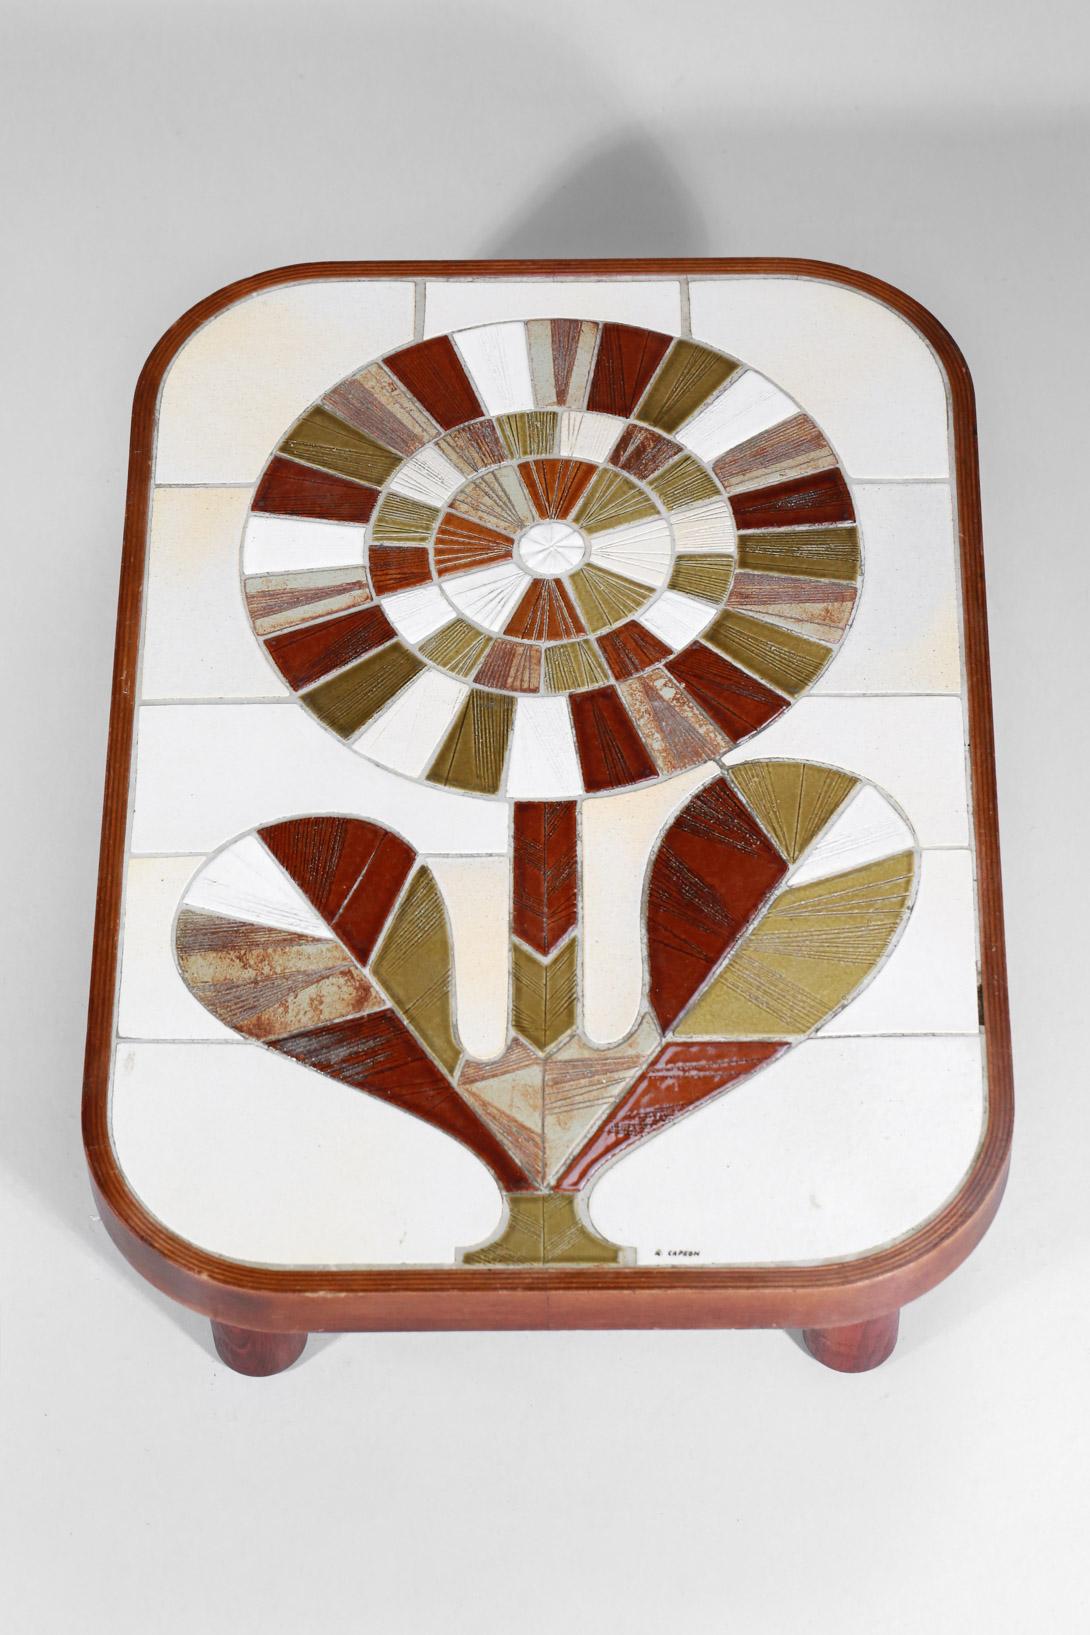 Mid-20th Century Coffee Table by French Ceramist Roger Capron in the Shape of a Flower